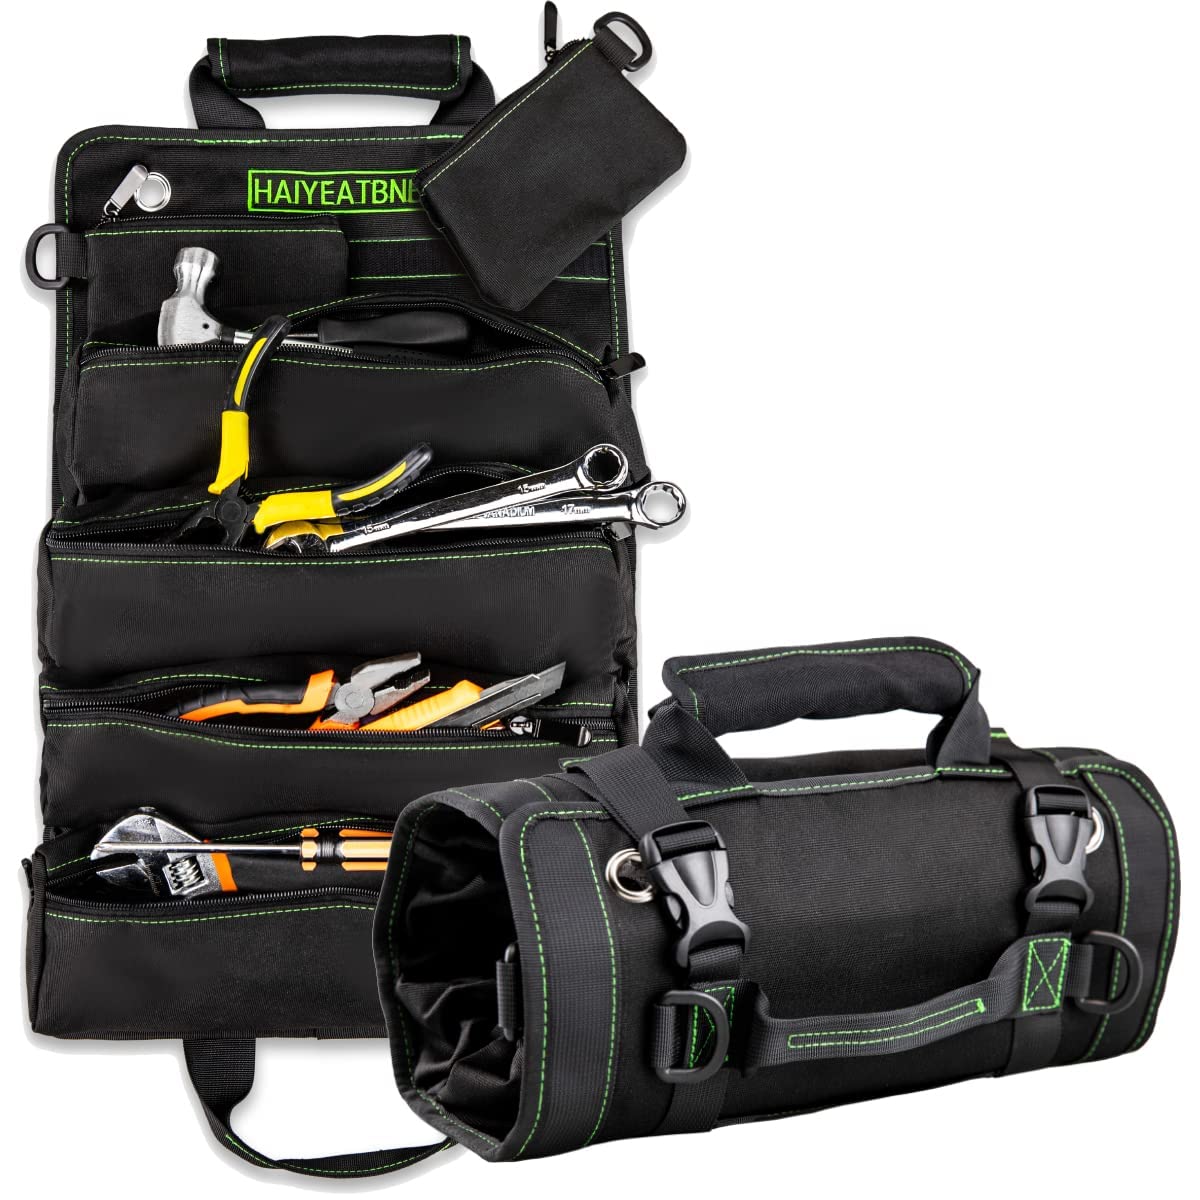 Tool Roll Up Bag,Heavy Duty Tool Bag Organizer with 6 Tool Bags,Rolling Tool Bag for Motorcycle and Truck,HVAC Tool Bag for Electricians and Mechanic